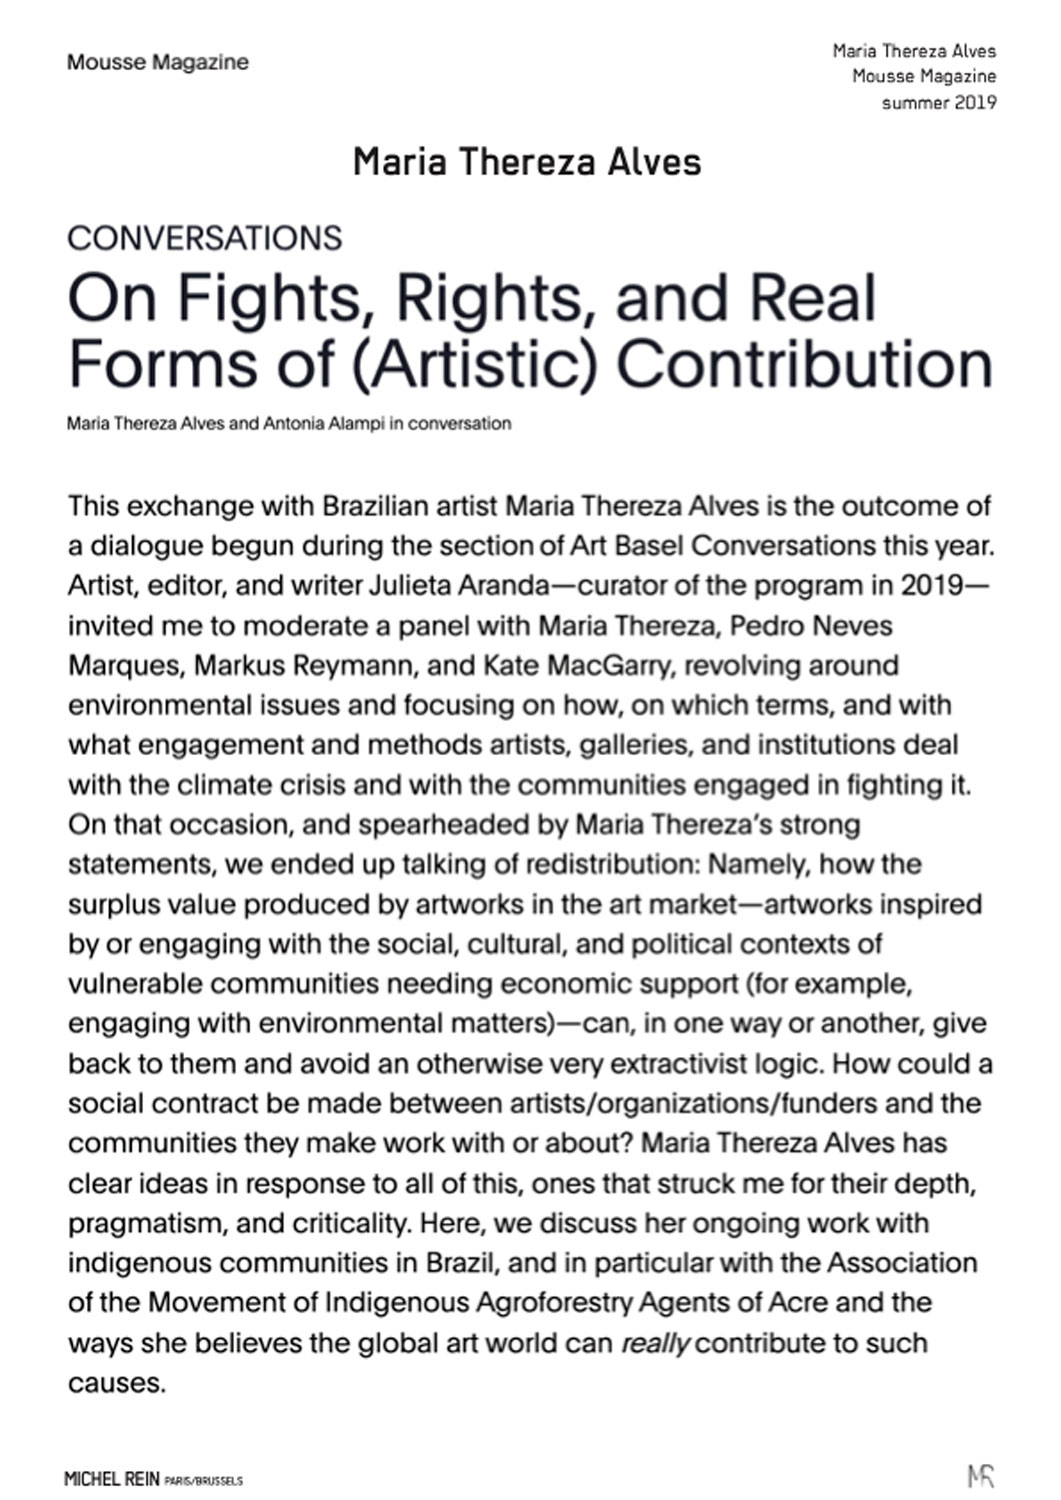 Conversations - On Fights, Rights, and real Forms of (Artistic) Contribution - Mousse Magazine